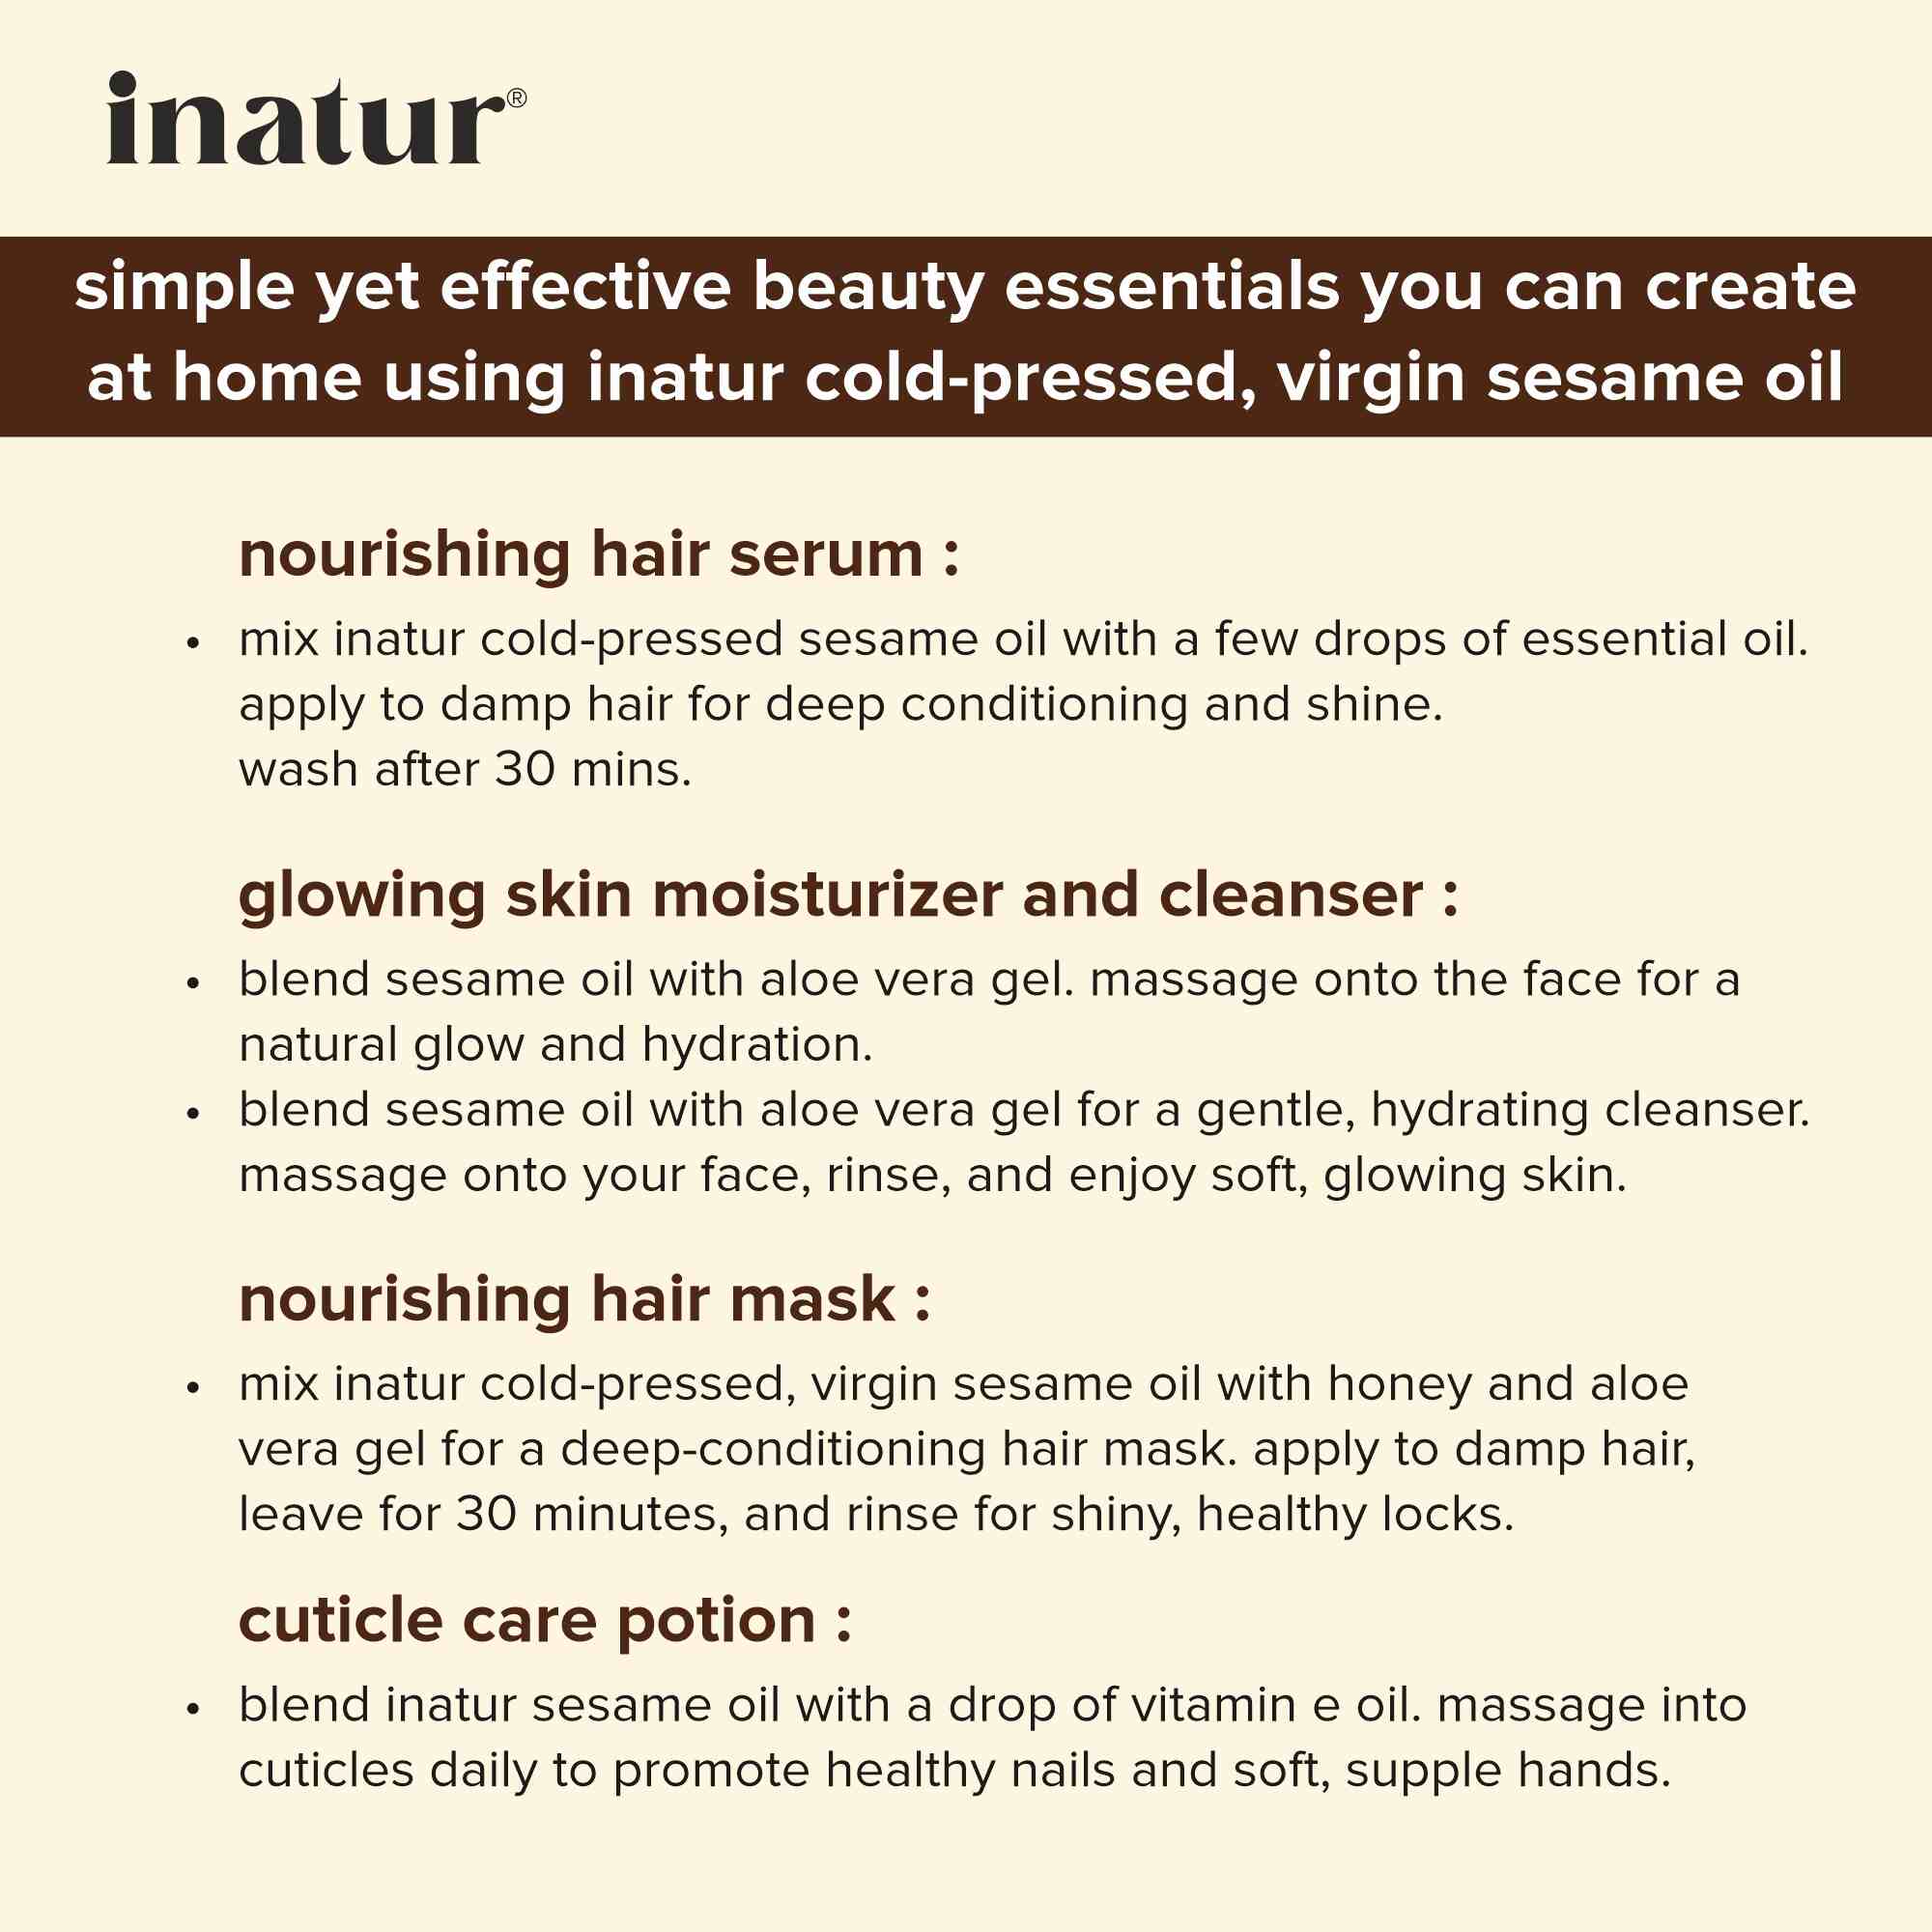 effectiveness of inatur cold pressed sesame oil